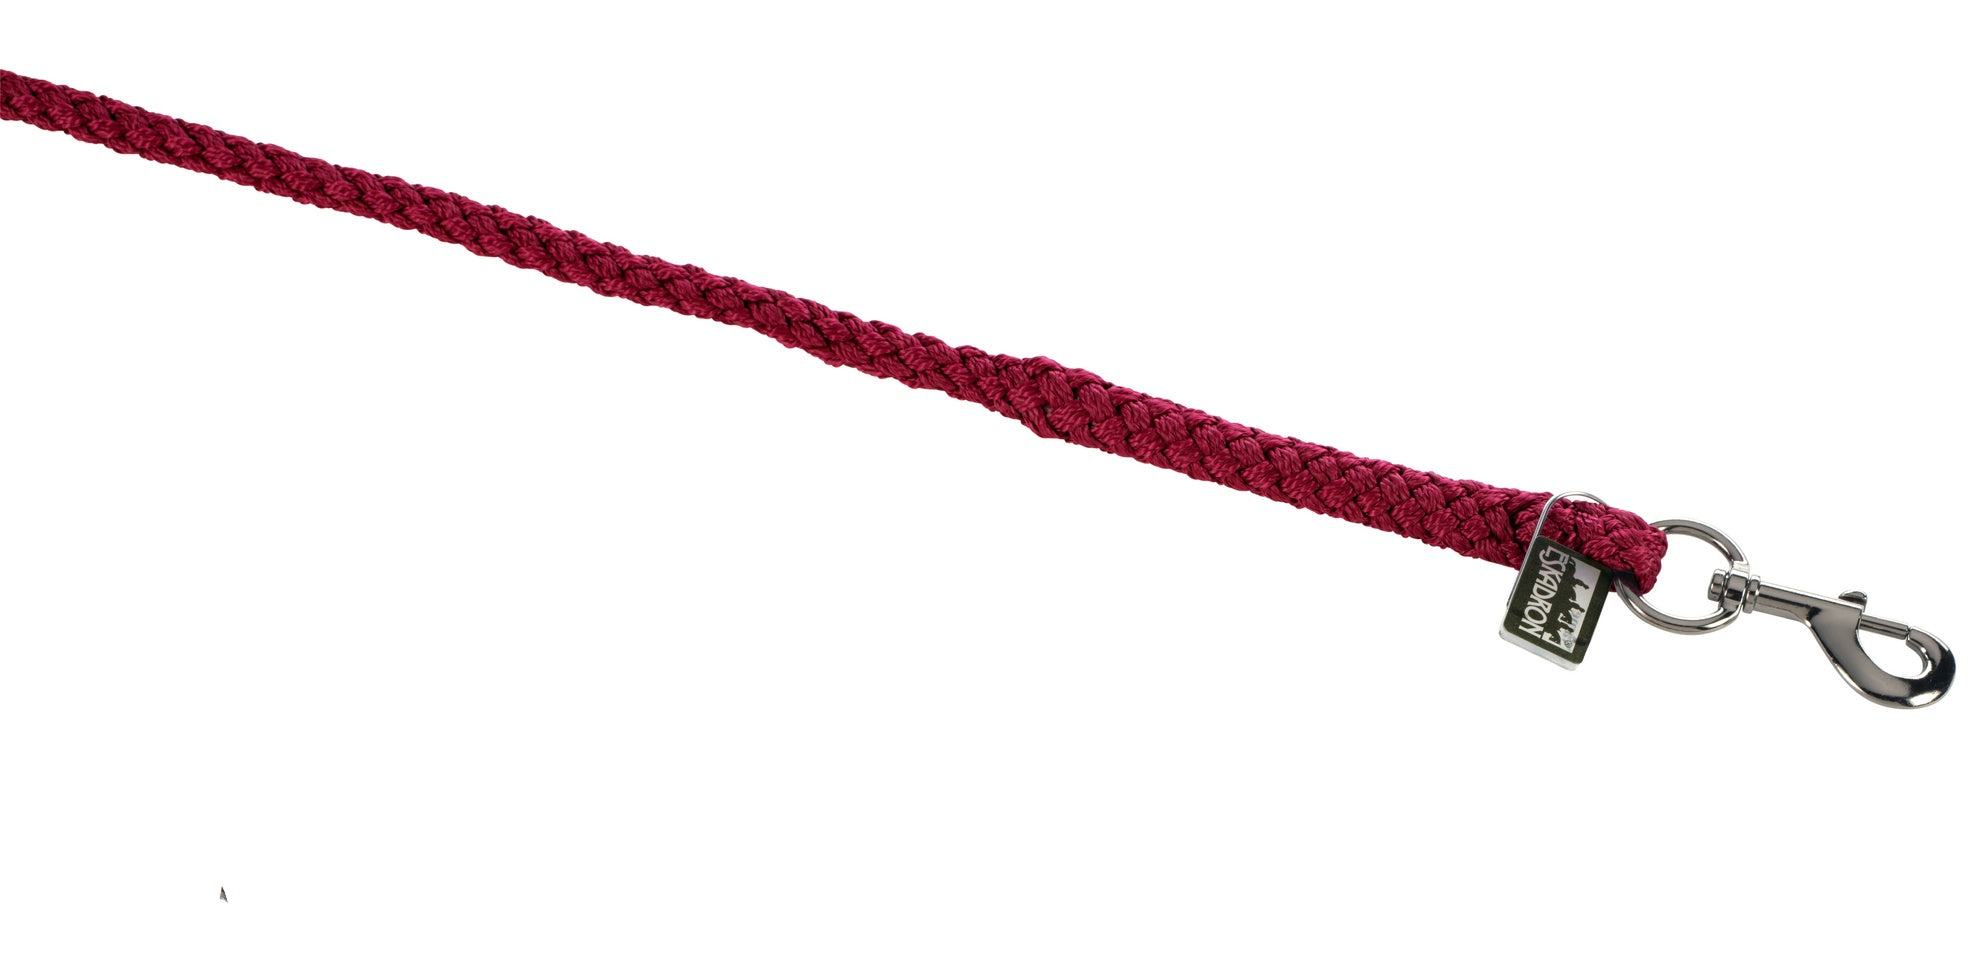 Eskadron aw21 classic rustic red leadrope